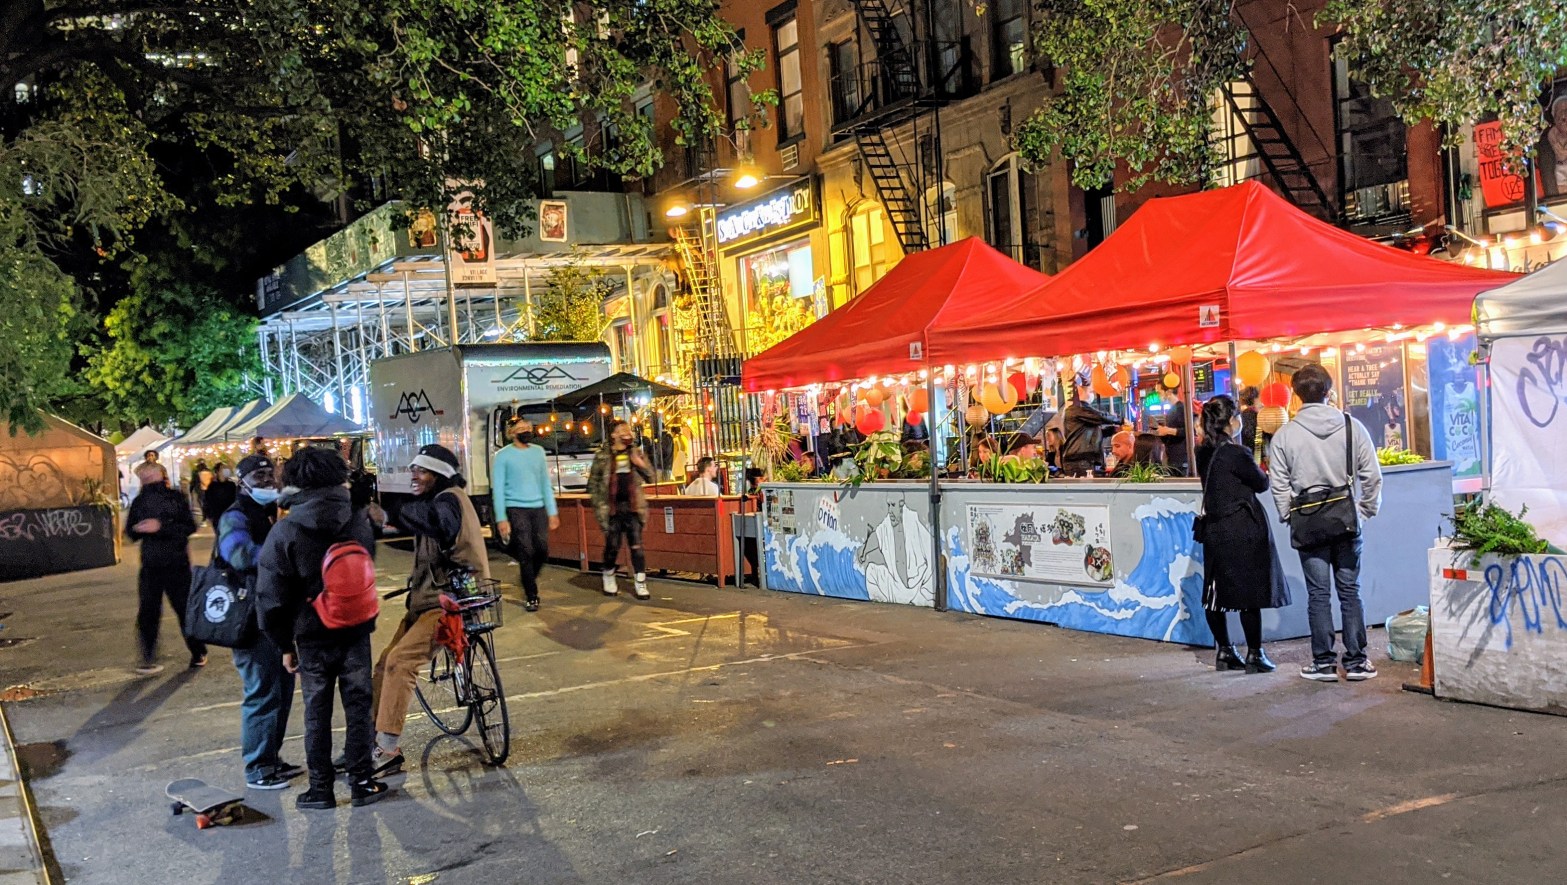 Image of outdoor dining streeteries on St. Marks Place in Manhattan